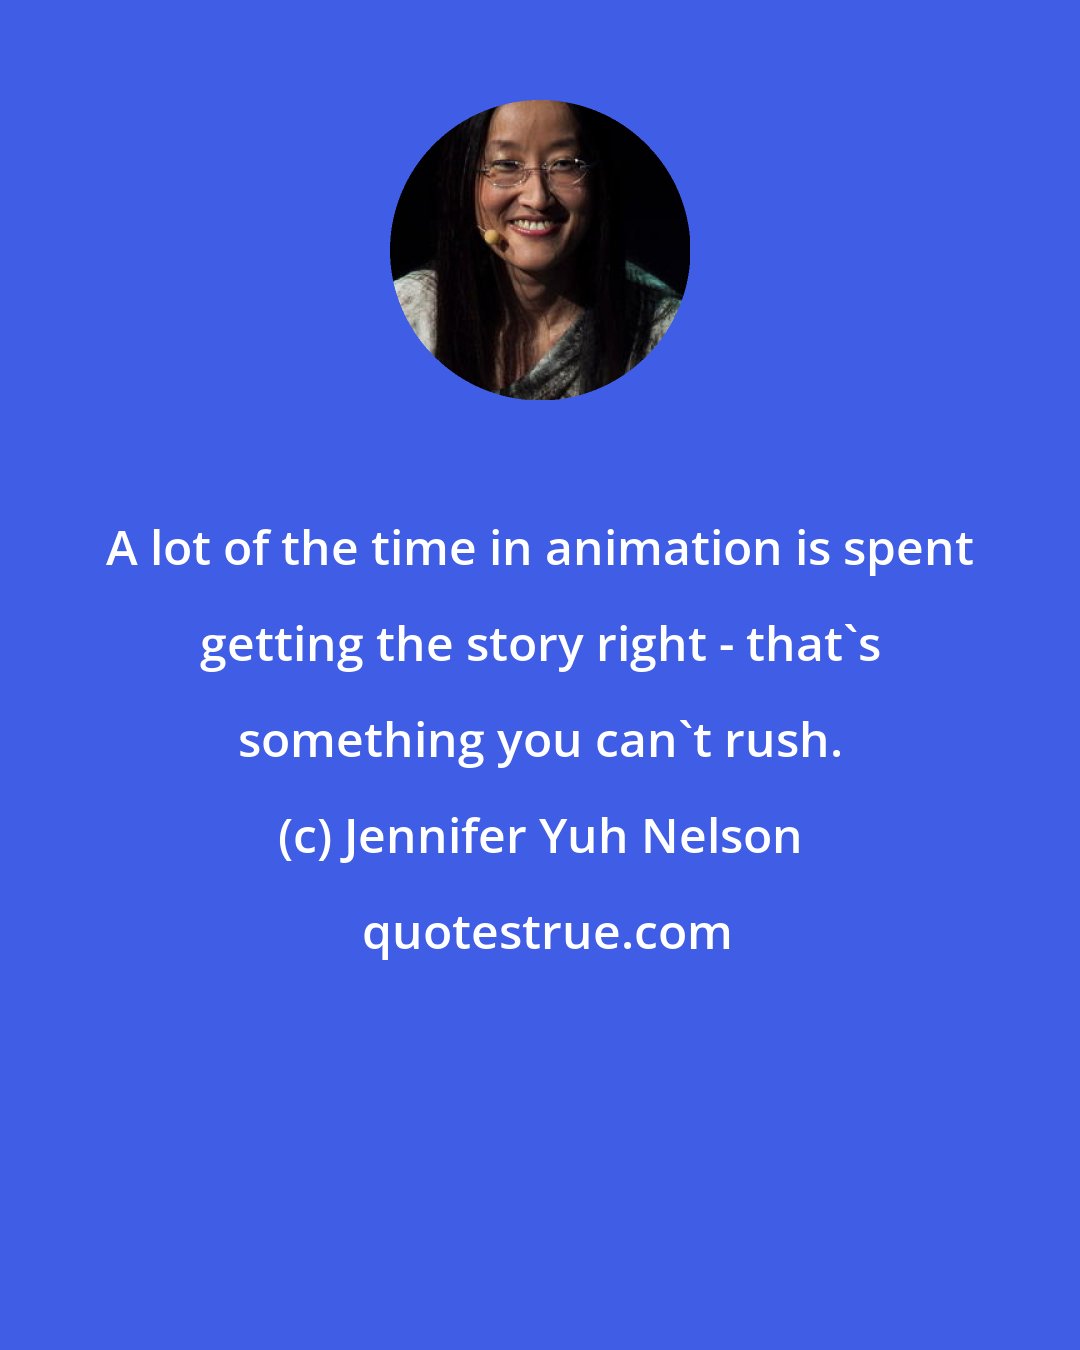 Jennifer Yuh Nelson: A lot of the time in animation is spent getting the story right - that's something you can't rush.